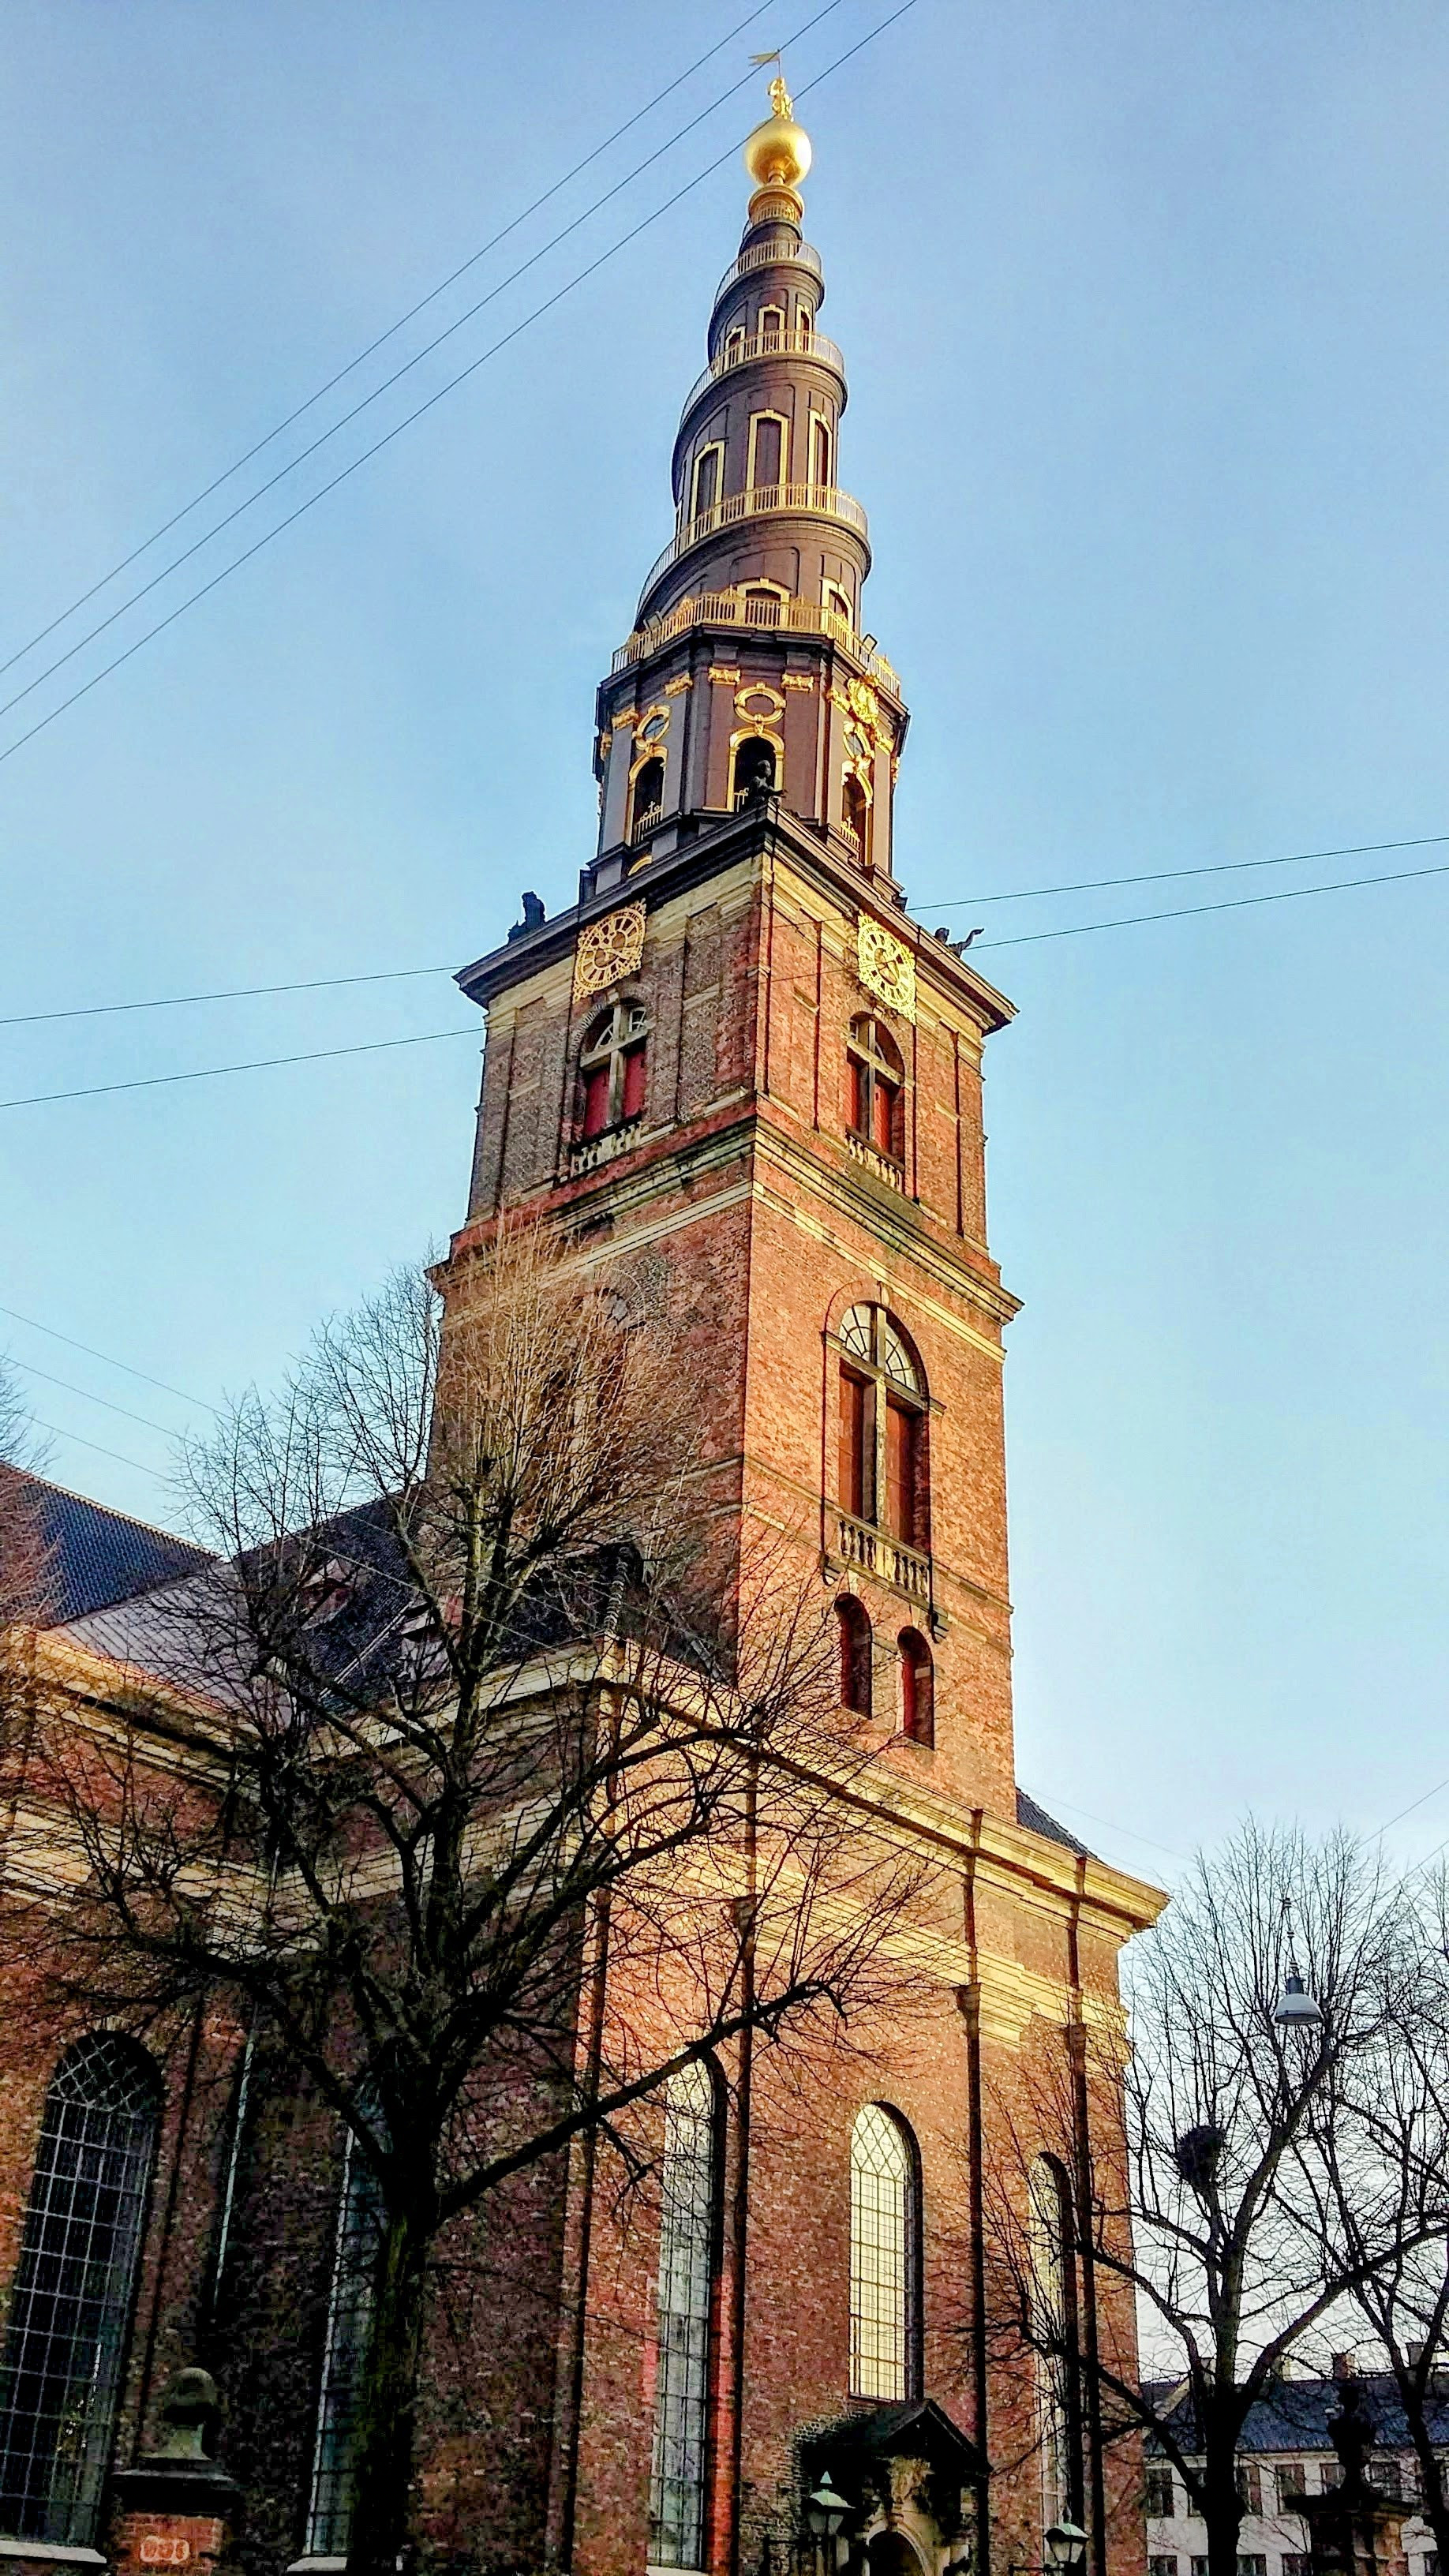 Church of our Saviour with it's spiral tower.